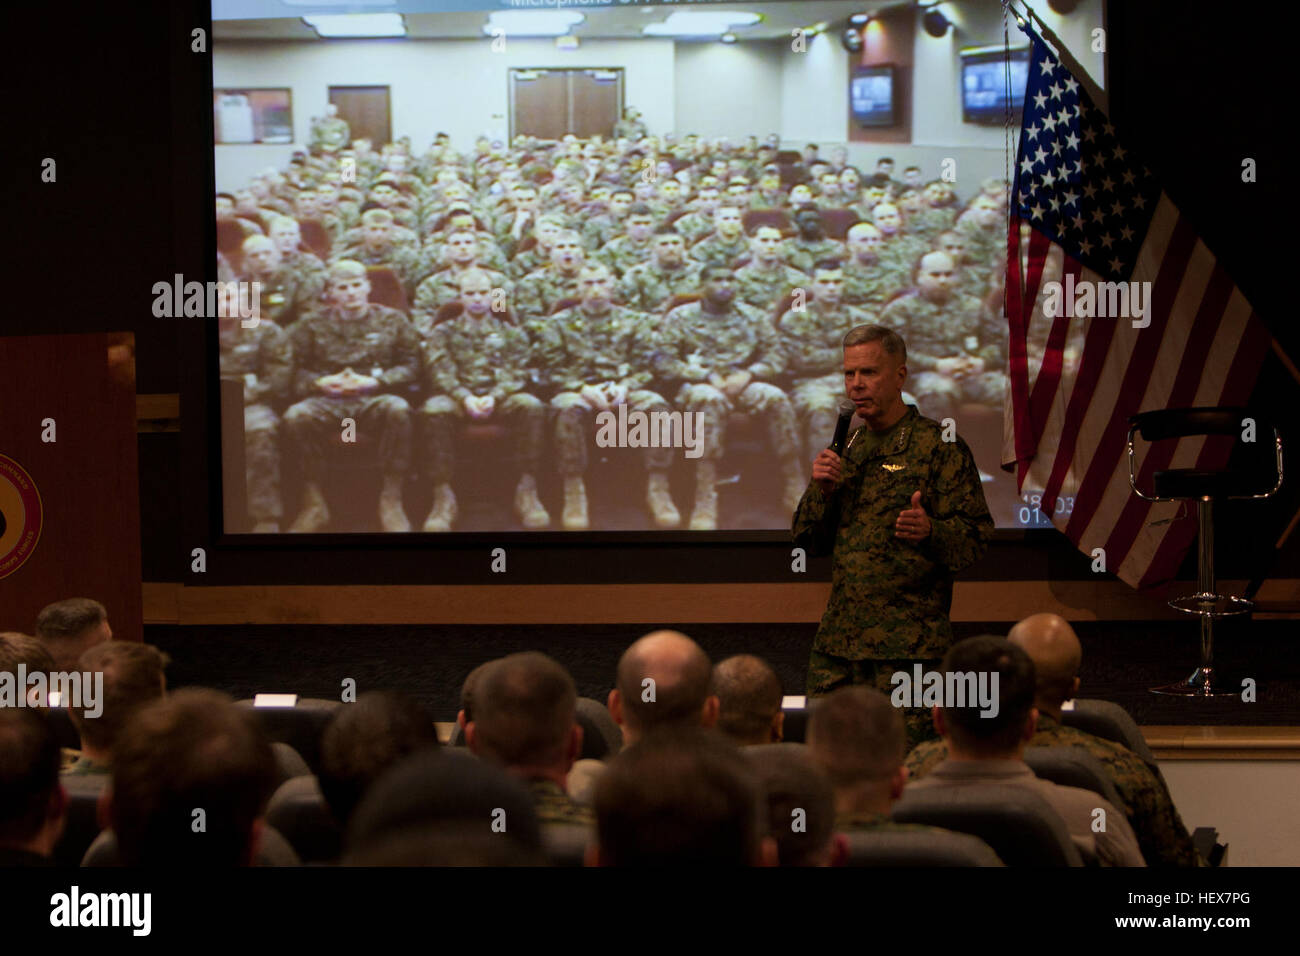 Commandant of the Marine Corps, Gen. James F. Amos, speaks to the Marines, Sailors and civilians of Marine Corps Forces, Special Operations Command to include the MARSOC Marines on the West Coast during a visit to MARSOC headquarters on Camp Lejeune, Jan. 18, 2011. He spoke regarding the future of MARSOC, reinforcing Marine Corps culture and heritage and his guidance for Marines to embrace MARSOC as it enters its fifth year. Toward the end of the visit, time was allowed for the floor to be open for questions. (U.S. Marine Corps photo by Cpl. Thomas W. Provost/Released) Commandant of the Marine Stock Photo